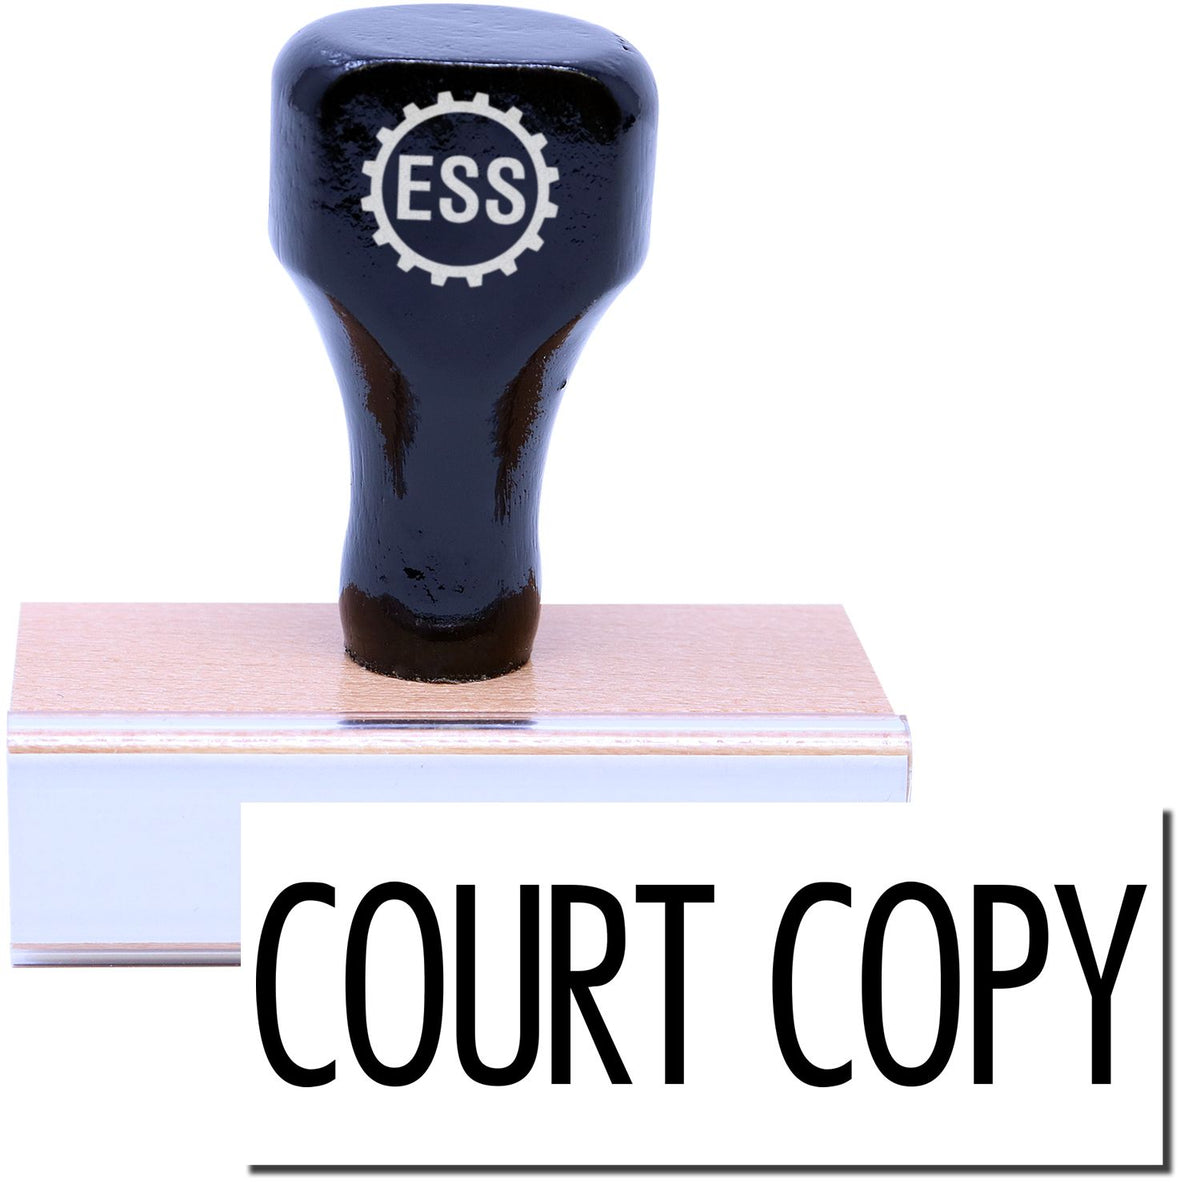 A stock office rubber stamp with a stamped image showing how the text &quot;COURT COPY&quot; in a narrow font is displayed after stamping.